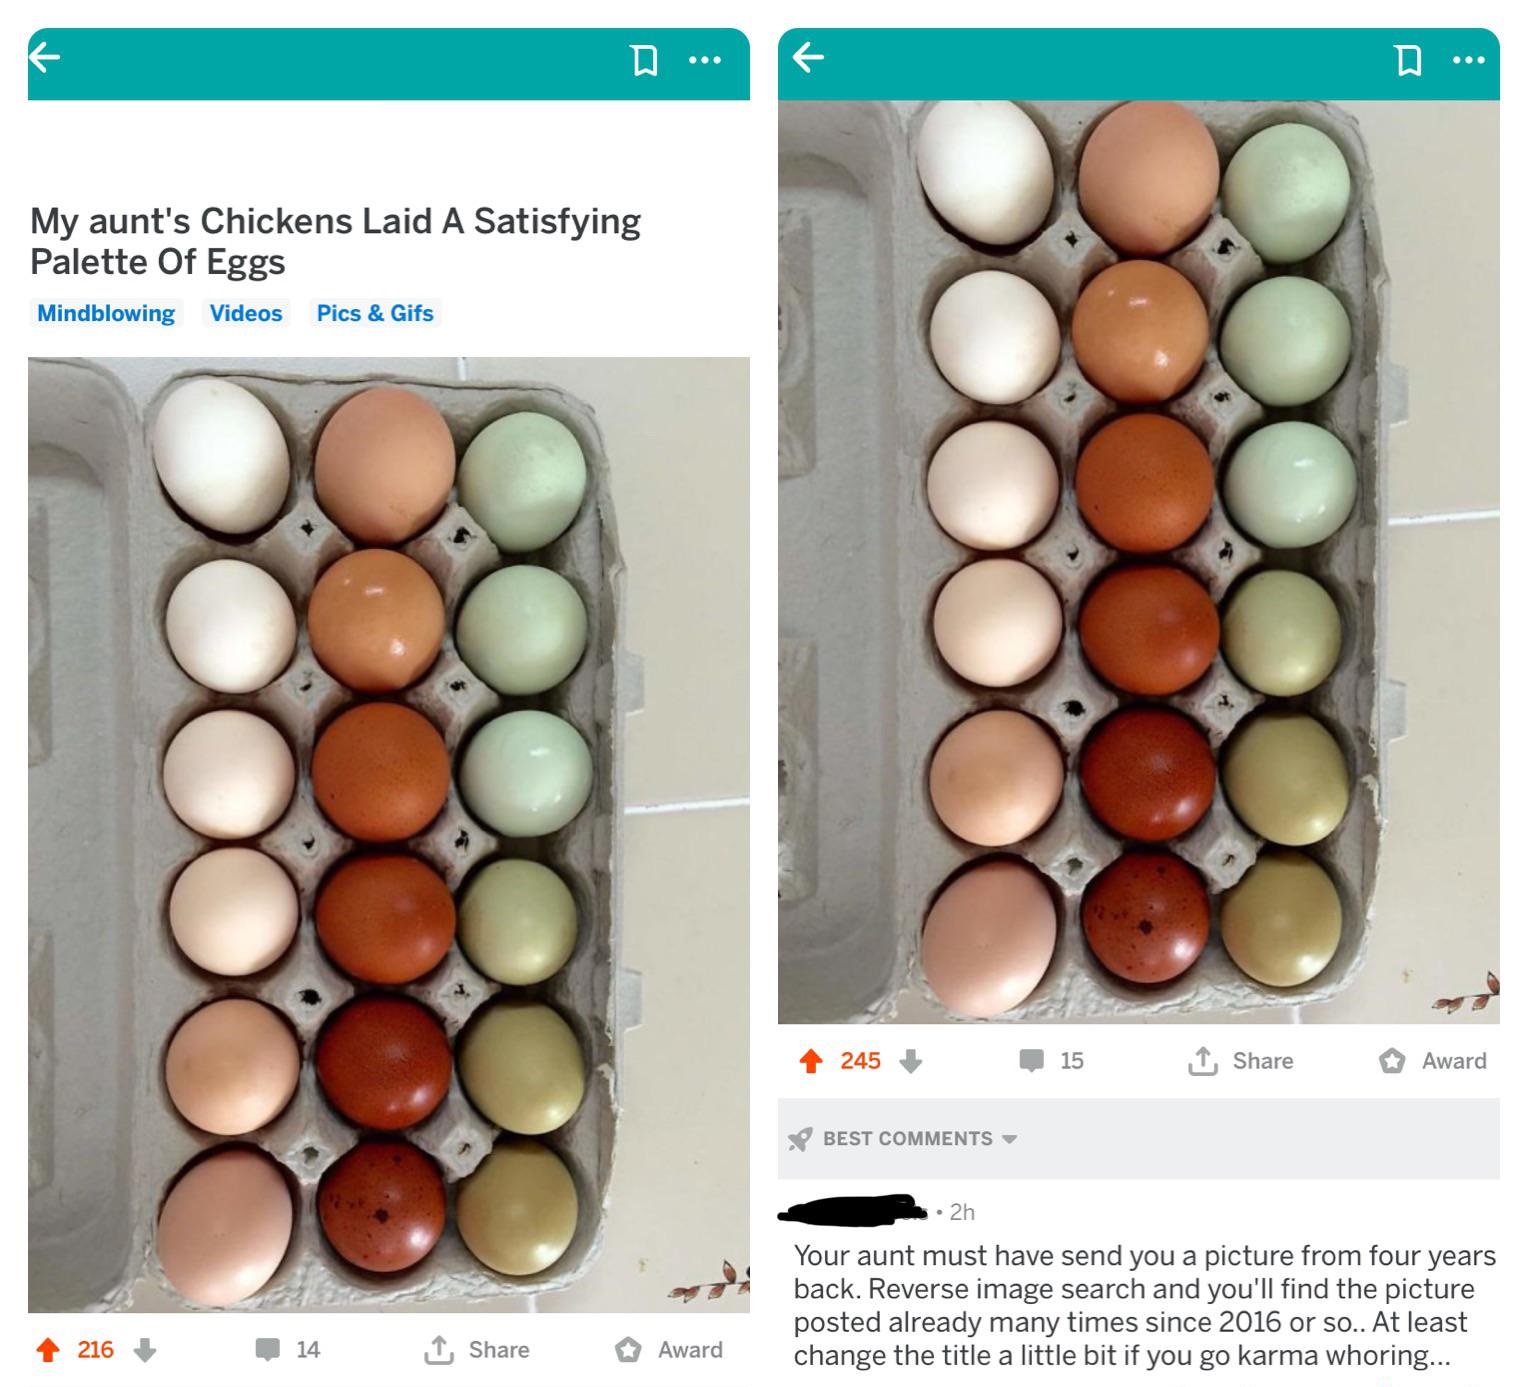 Egg - Df D... My aunt's Chickens Laid A Satisfying Palette Of Eggs Mindblowing Videos Pics & Gifs 245 15 Award Best 2h Your aunt must have send you a picture from four years back. Reverse image search and you'll find the picture posted already many times 